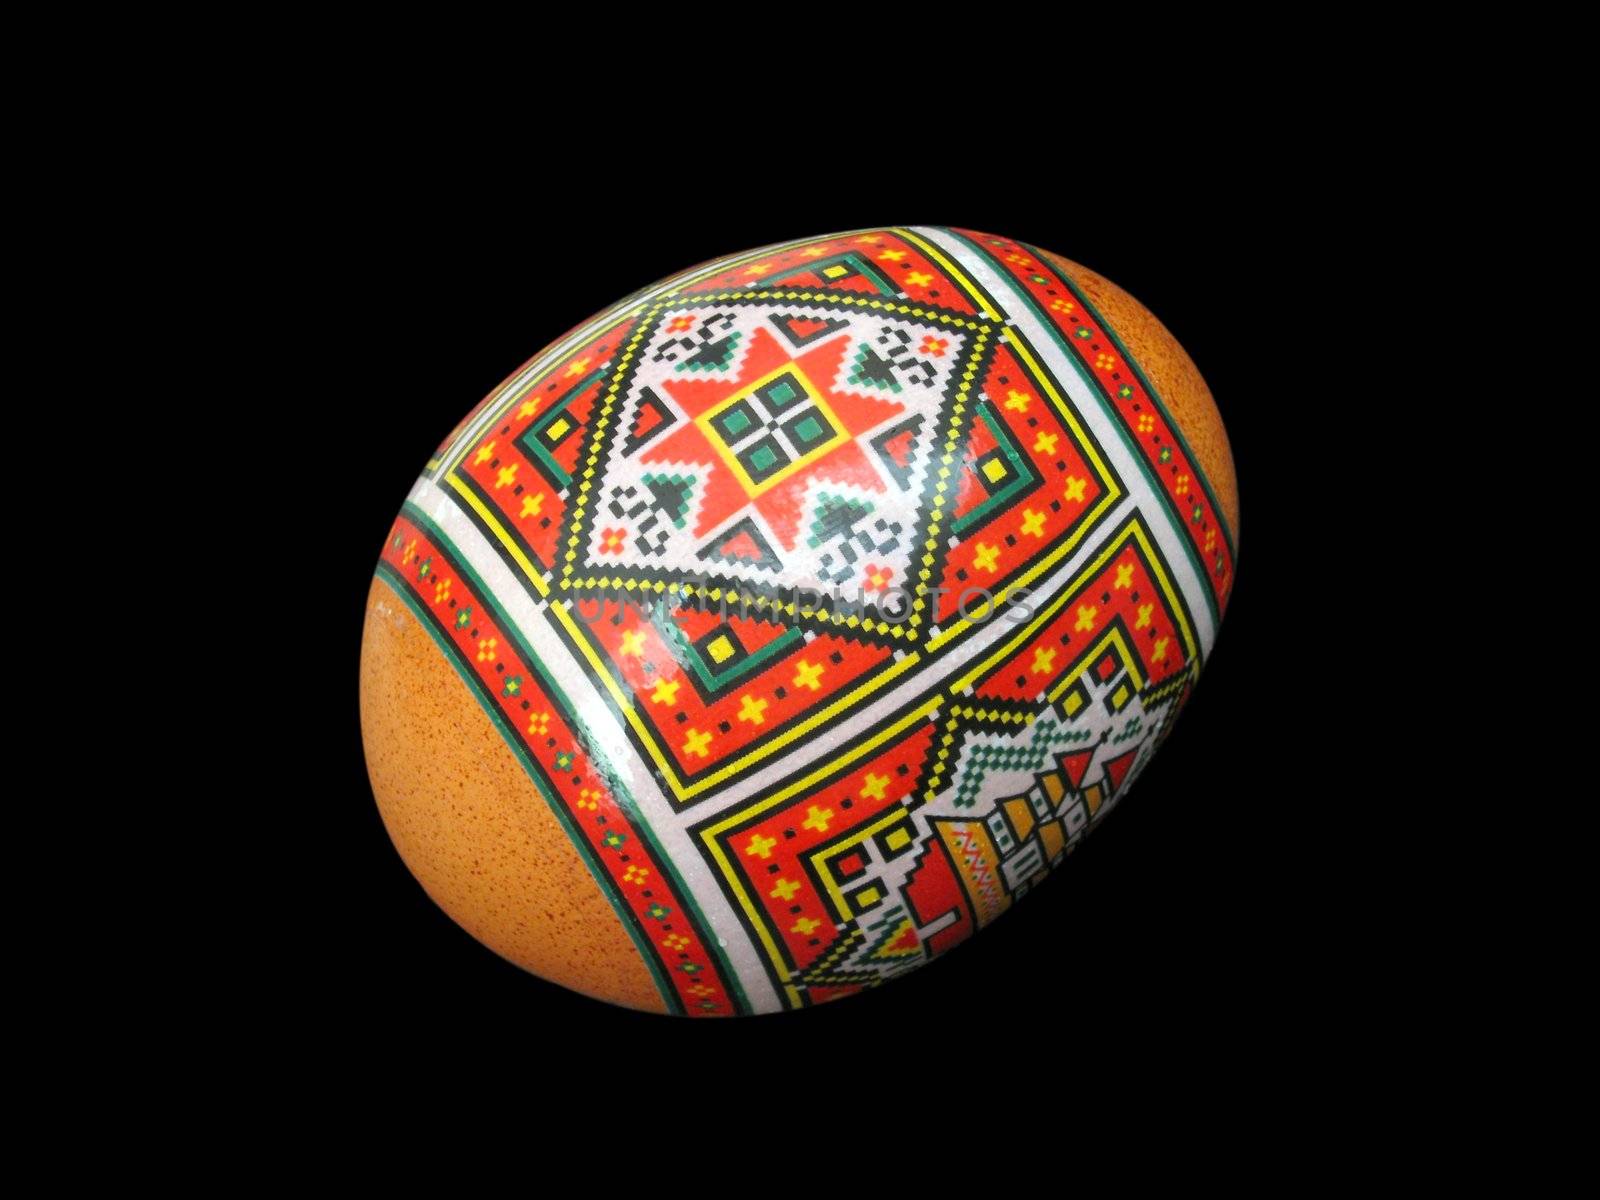 painted Easter egg over black